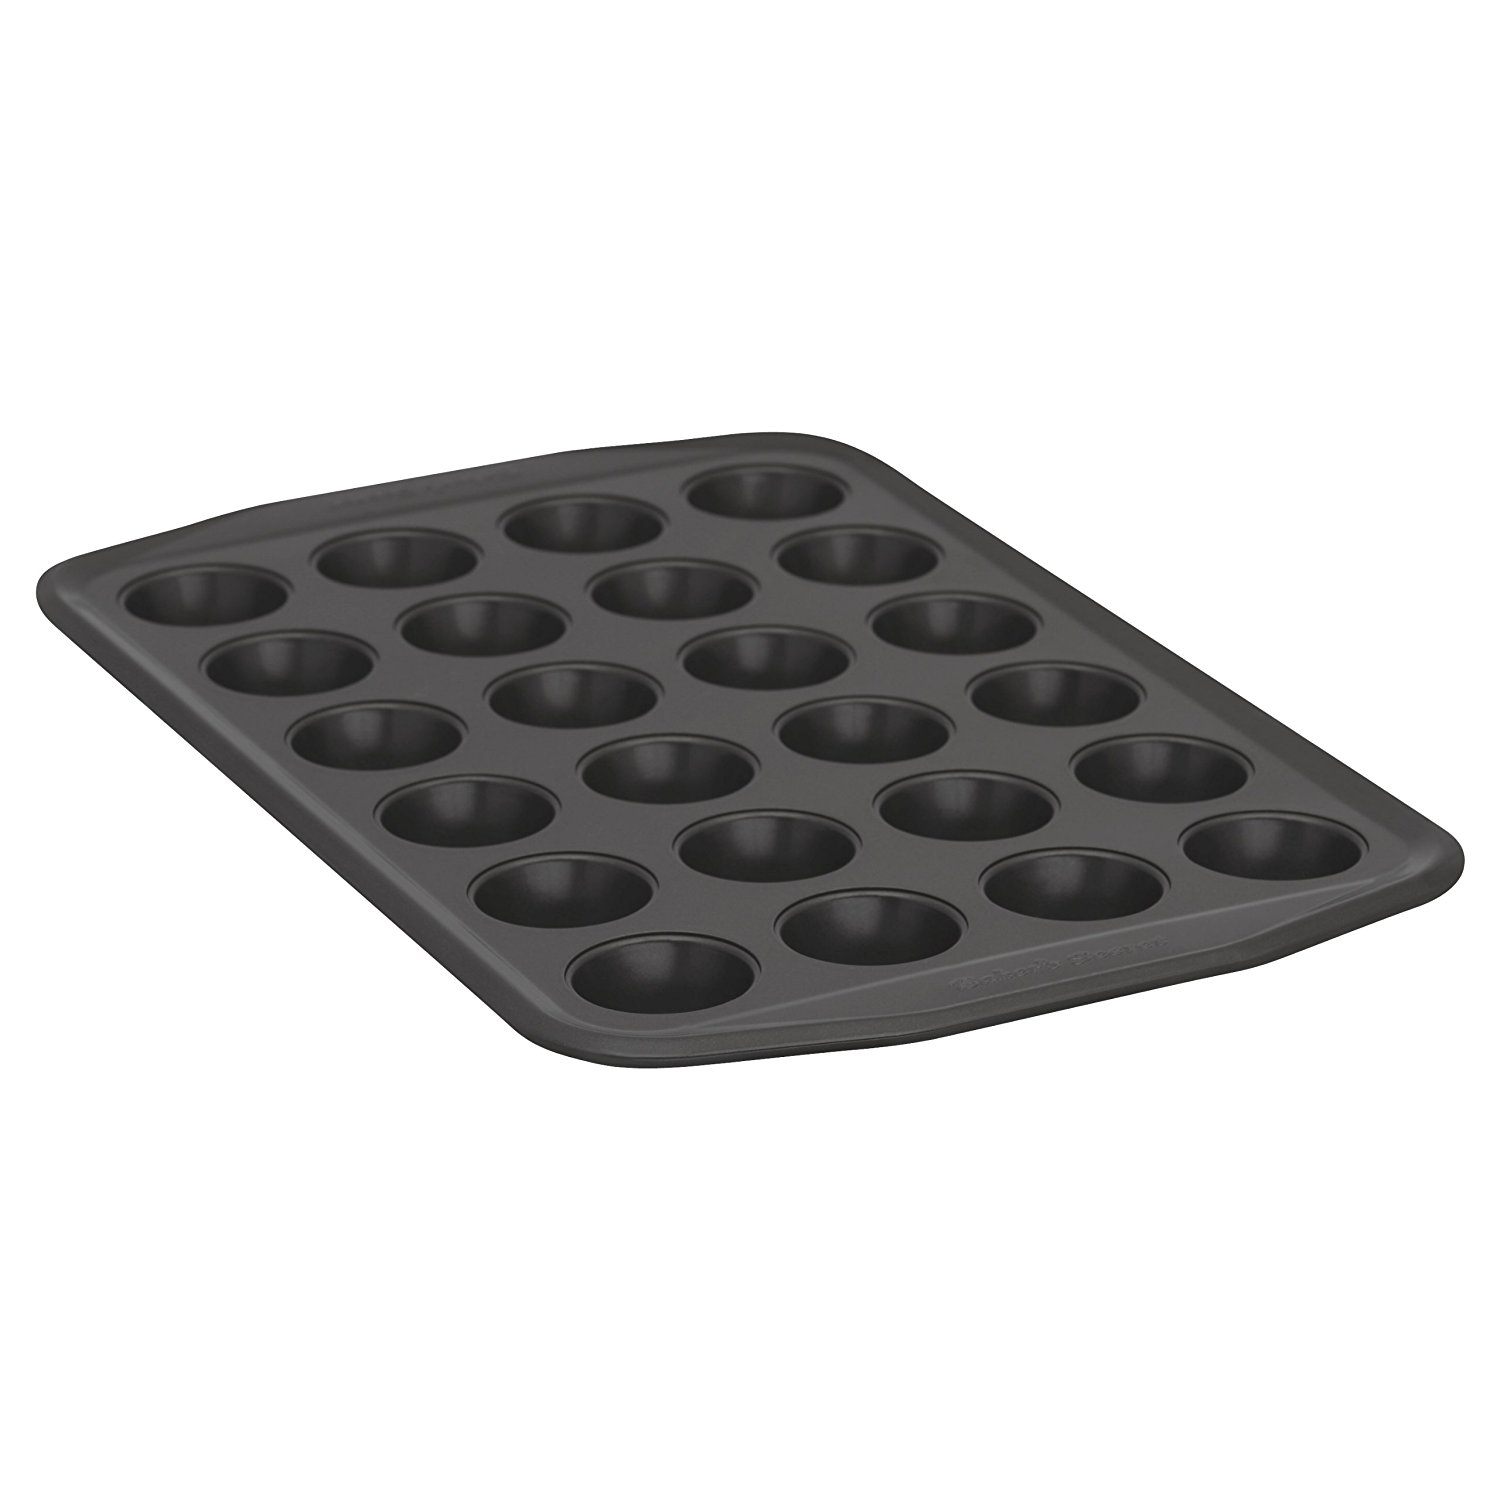 Baker's Secret Signature 24 Cup Steel Muffin Pan - image 2 of 2